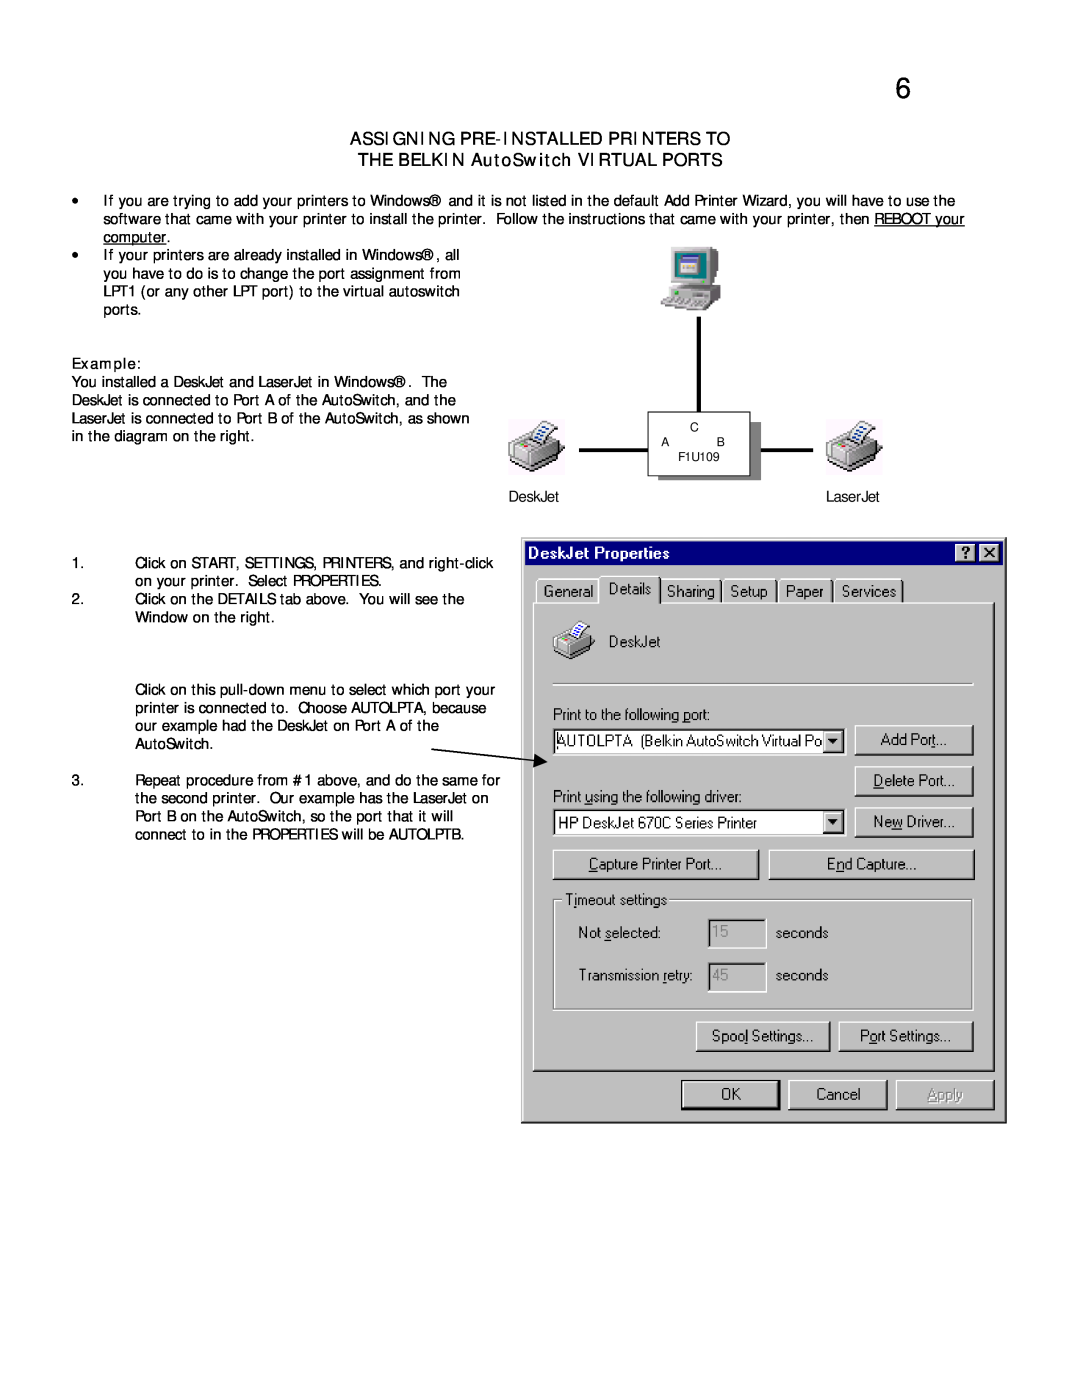 Belkin F1U109 user manual Assigning Pre-Installed Printers To, THE BELKIN AutoSwitch VIRTUAL PORTS, Example 